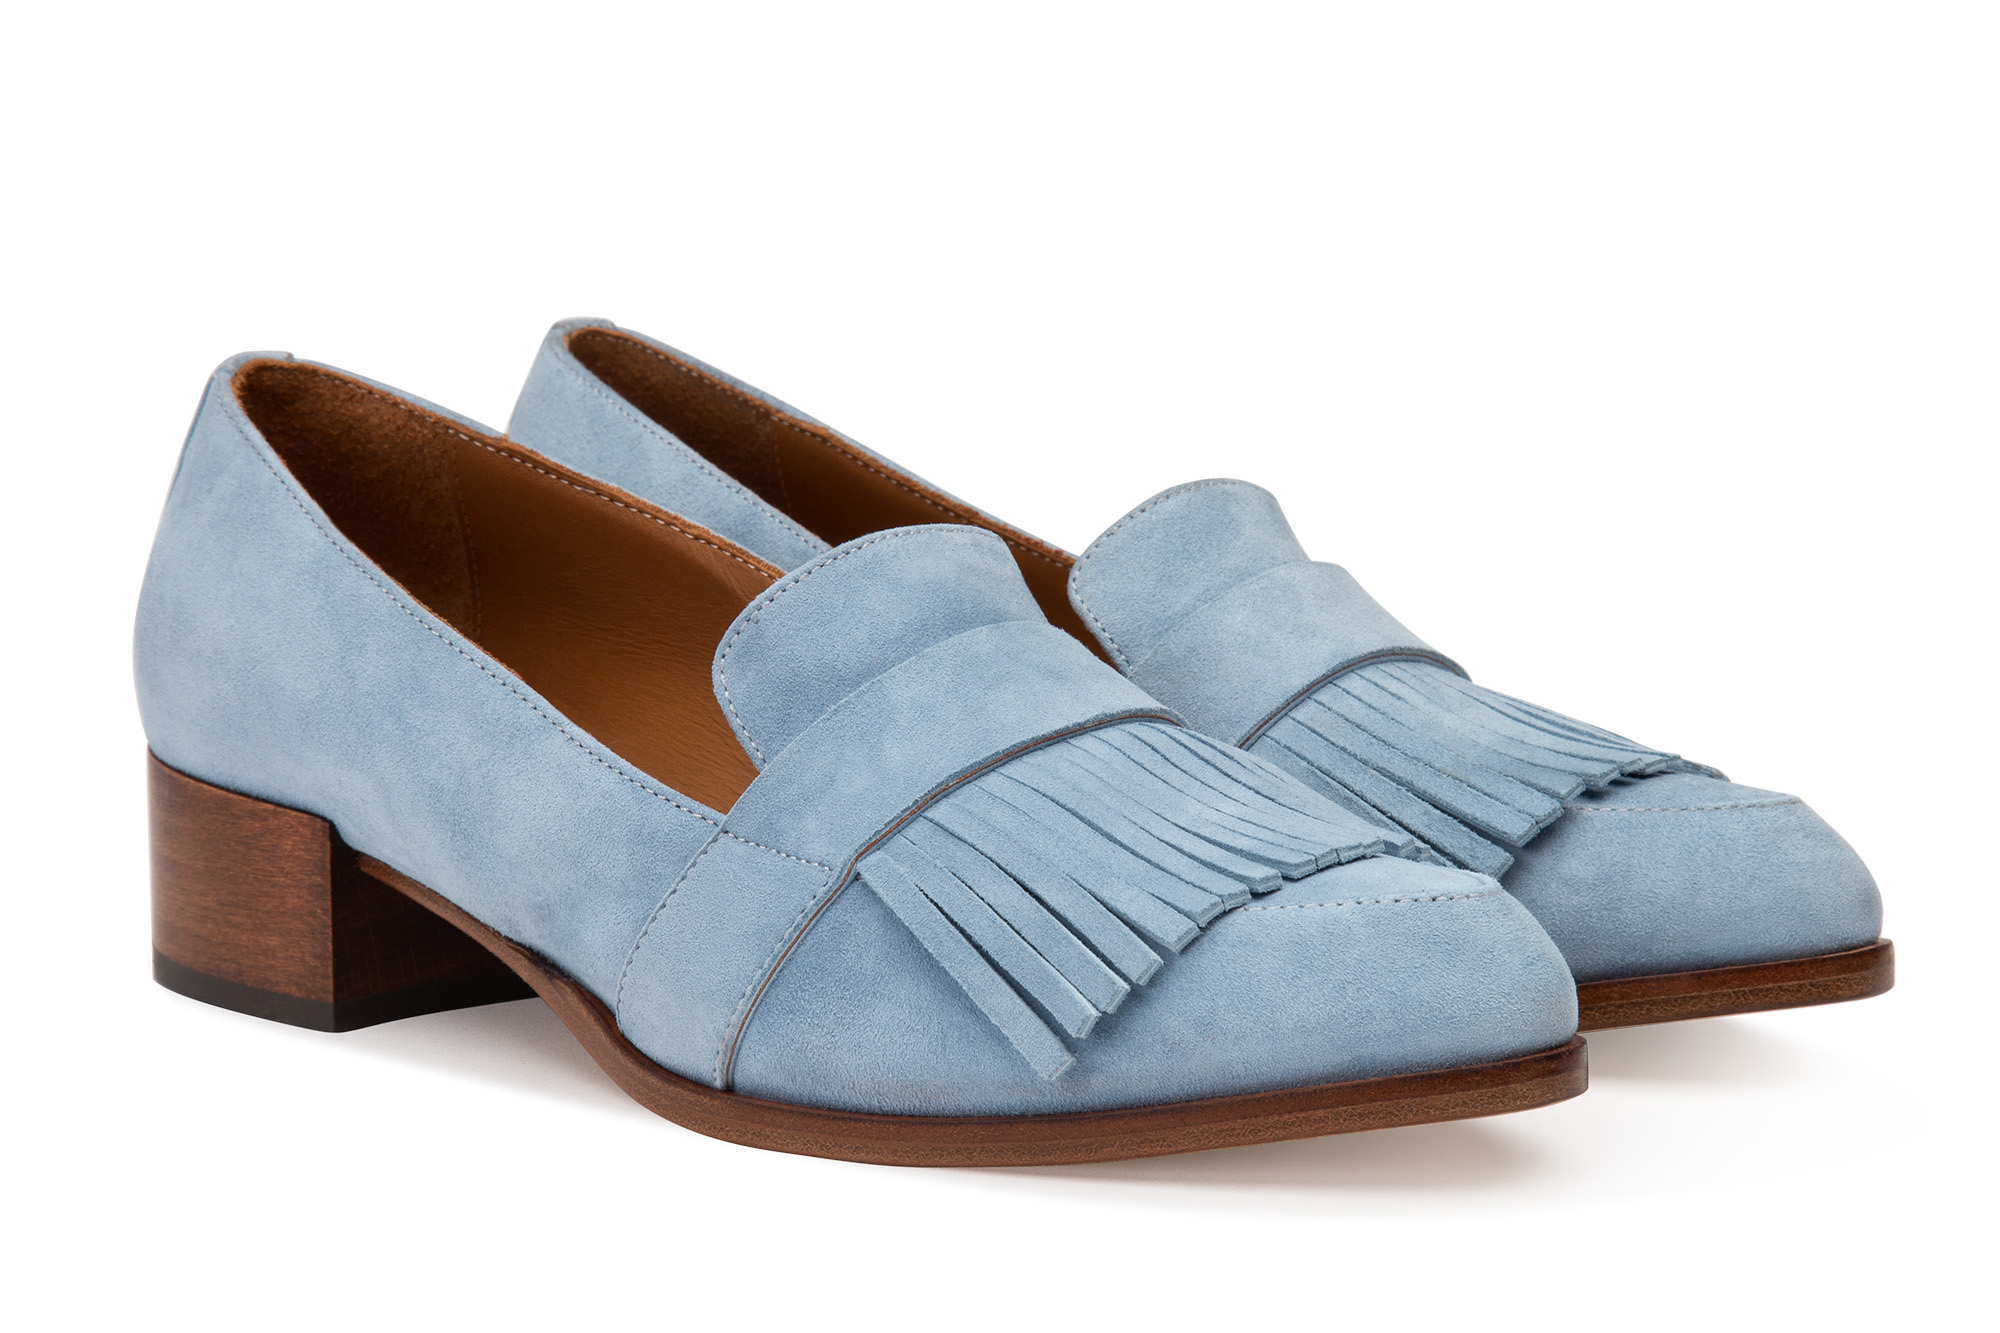 Ecommerce photography for Thelma Shoes, women's powder blue suede loafer with tassels